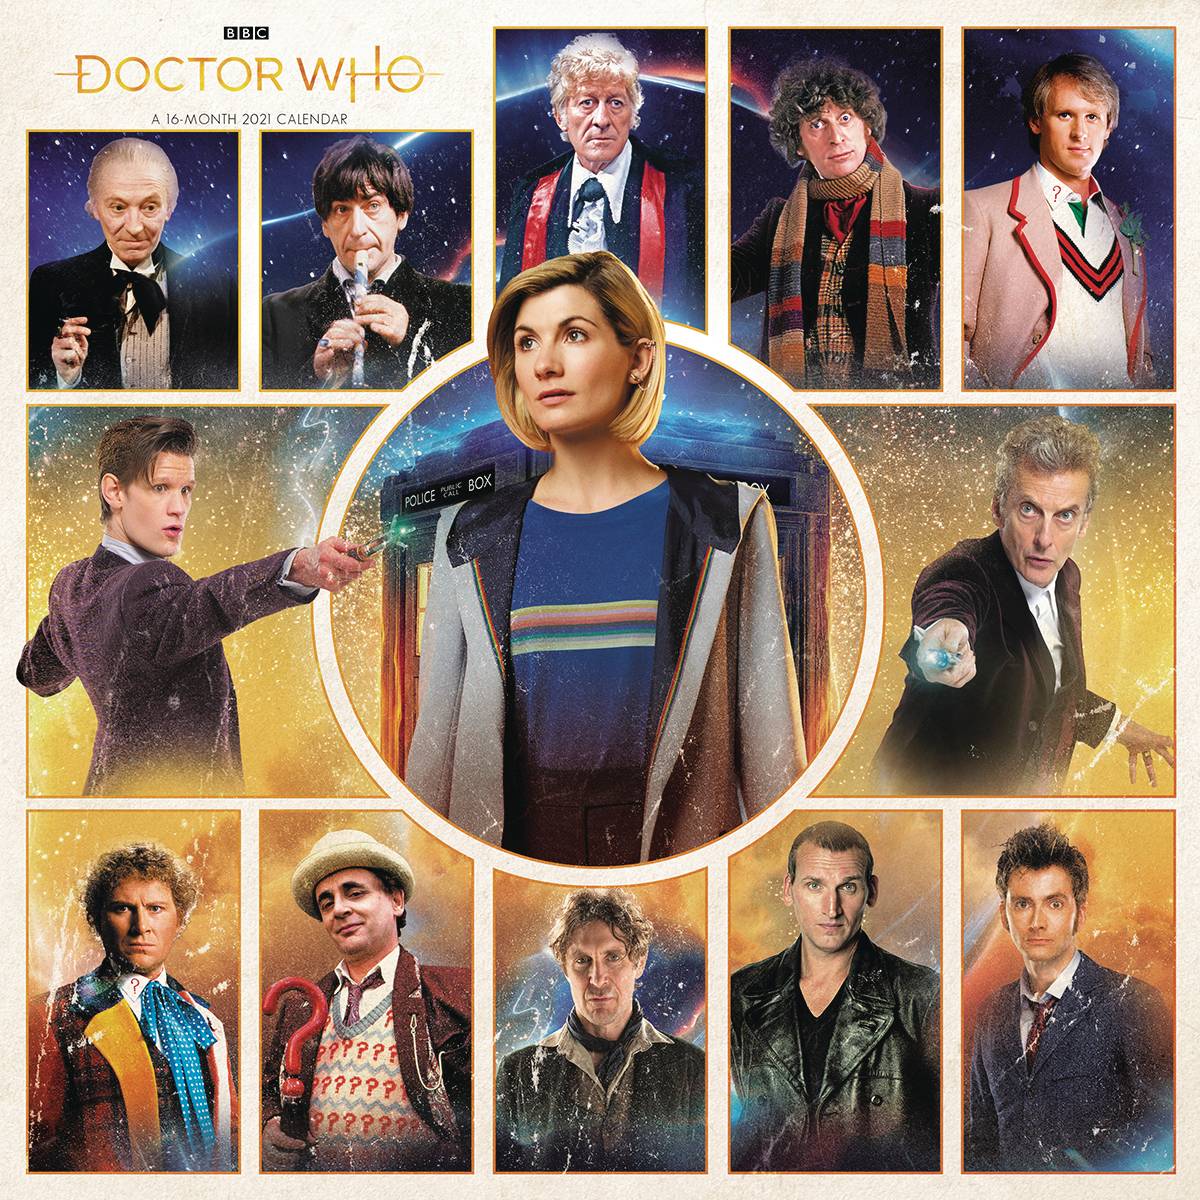 Doctor Who TV Series 16 Month 2020 Wall Calendar NEW SEALED 